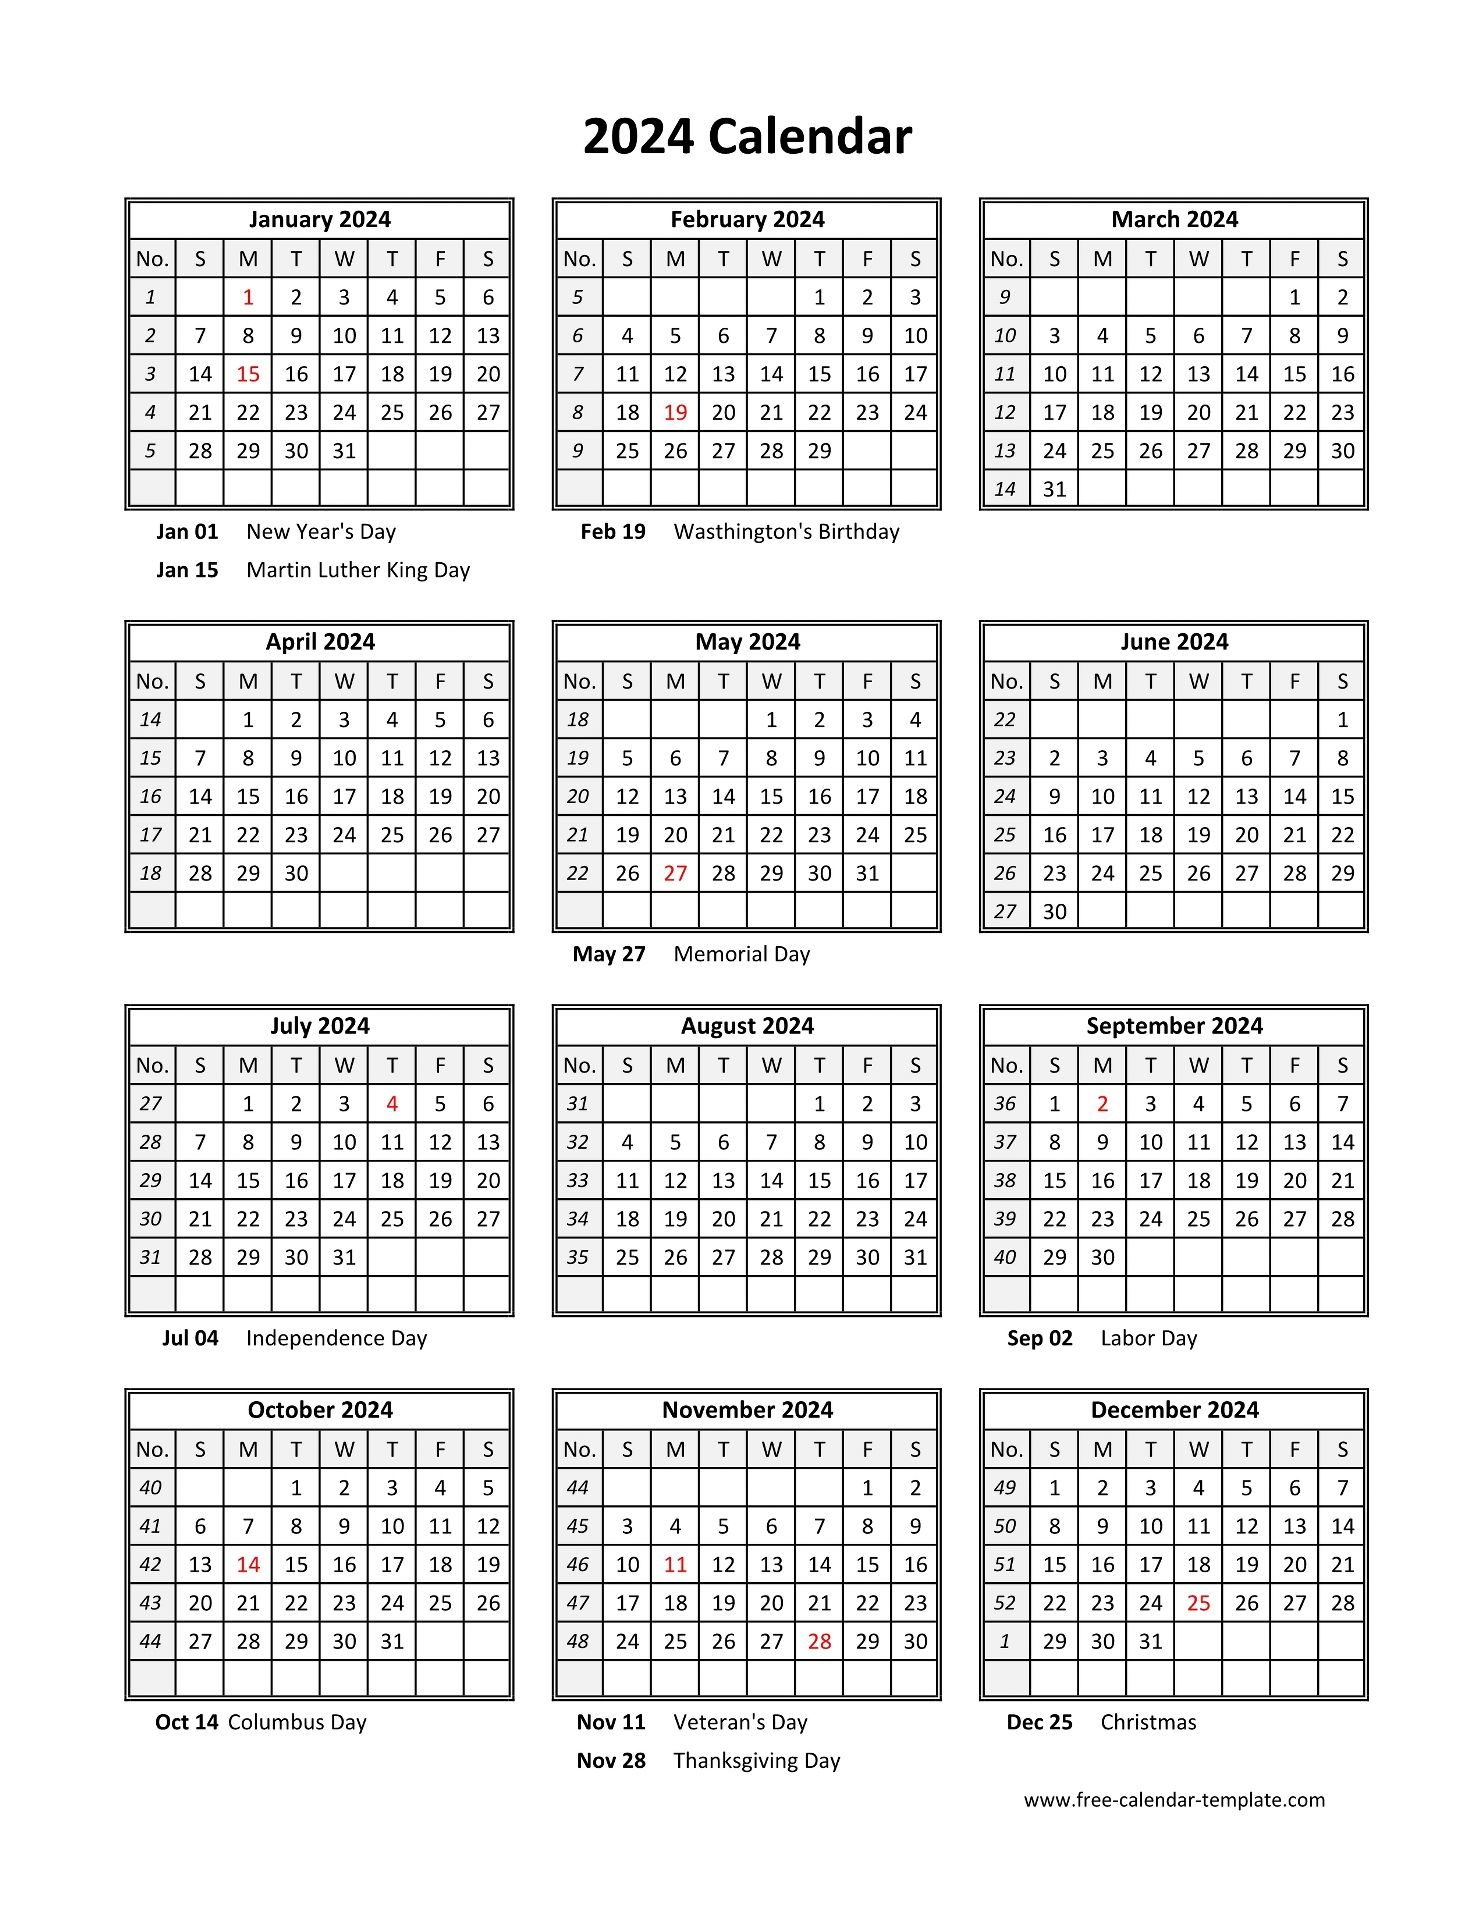 Yearly Printable Calendar 2024 With Holidays | Free-Calendar | Free Printable Calendar 2024 Year